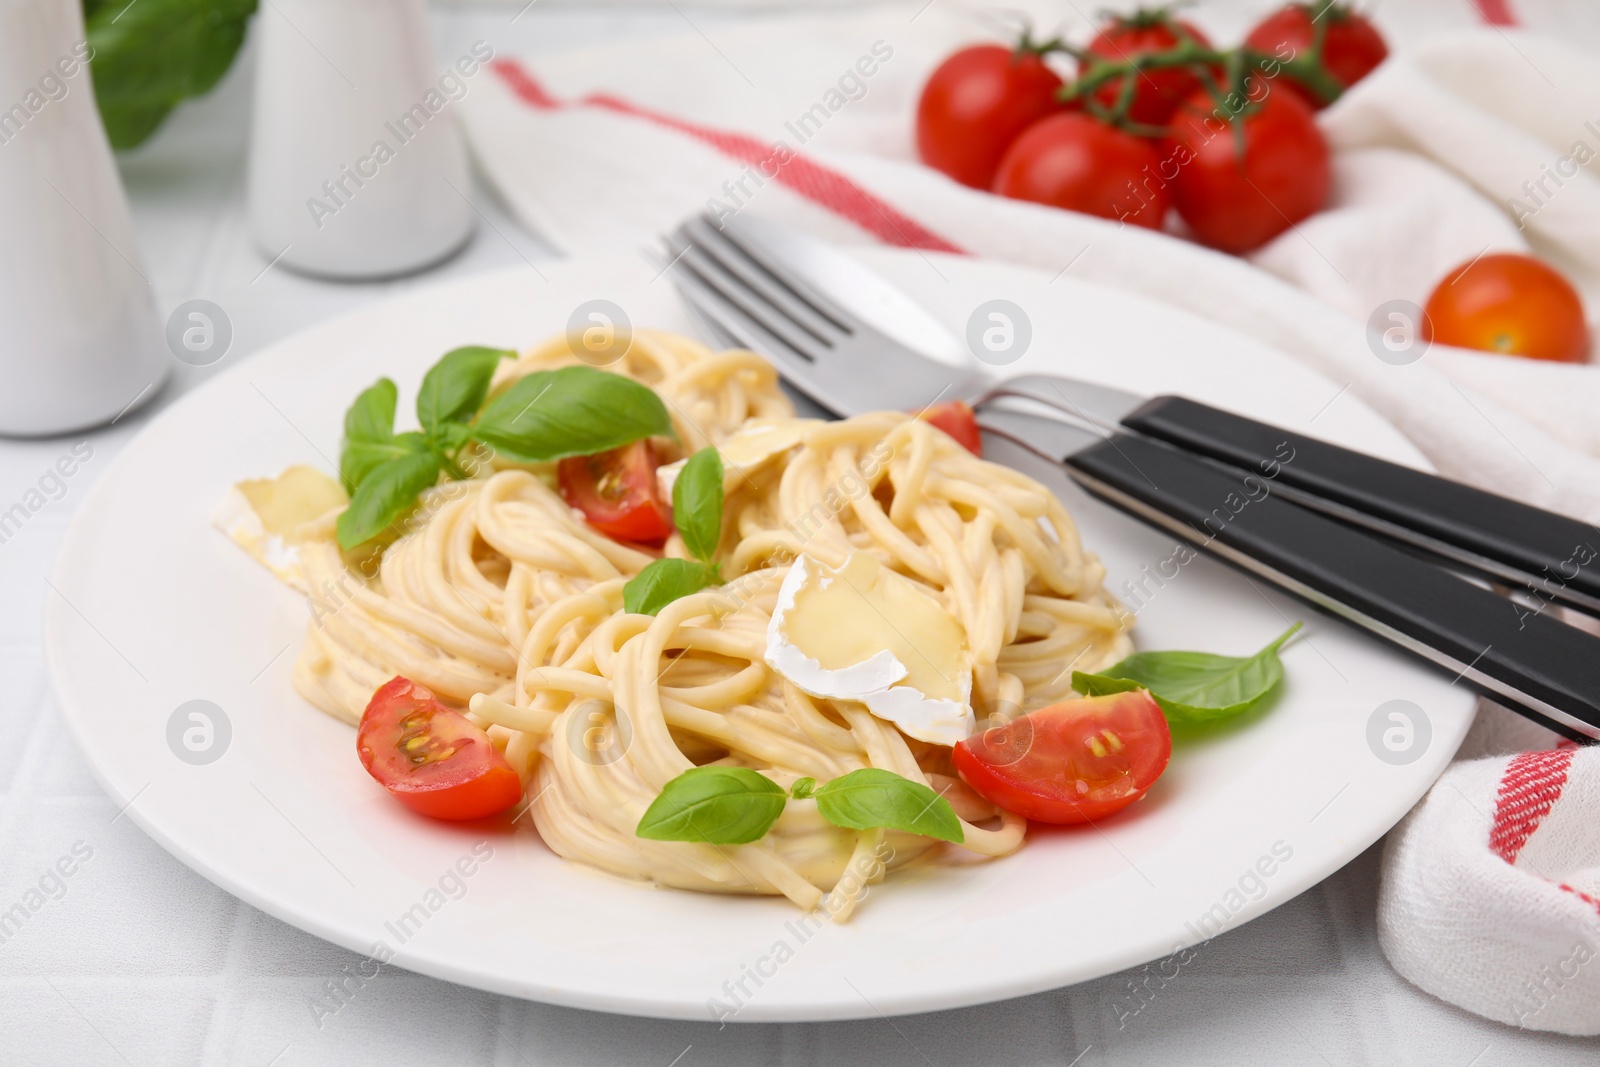 Photo of Delicious pasta with brie cheese, tomatoes, basil and cutlery on white tiled table, closeup